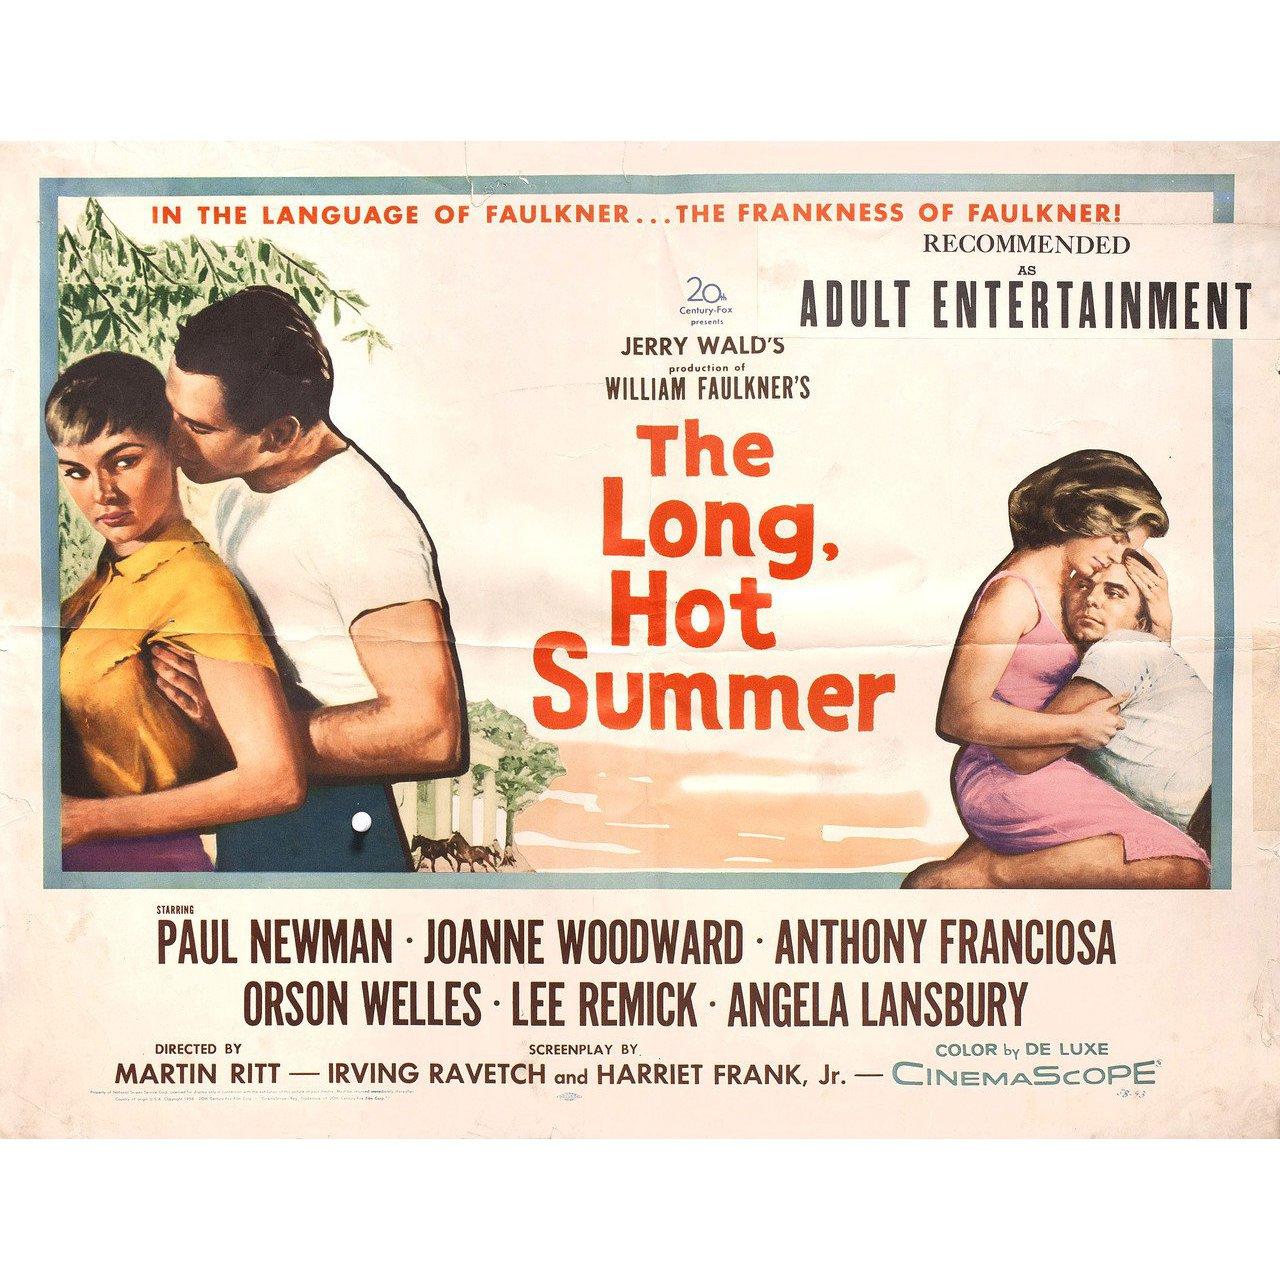 Original 1958 U.S. half sheet poster for the film 'The Long, Hot Summer' directed by Martin Ritt with Paul Newman / Joanne Woodward / Anthony Franciosa / Orson Welles. Good-very good condition, folded with censor stamp. Many original posters were